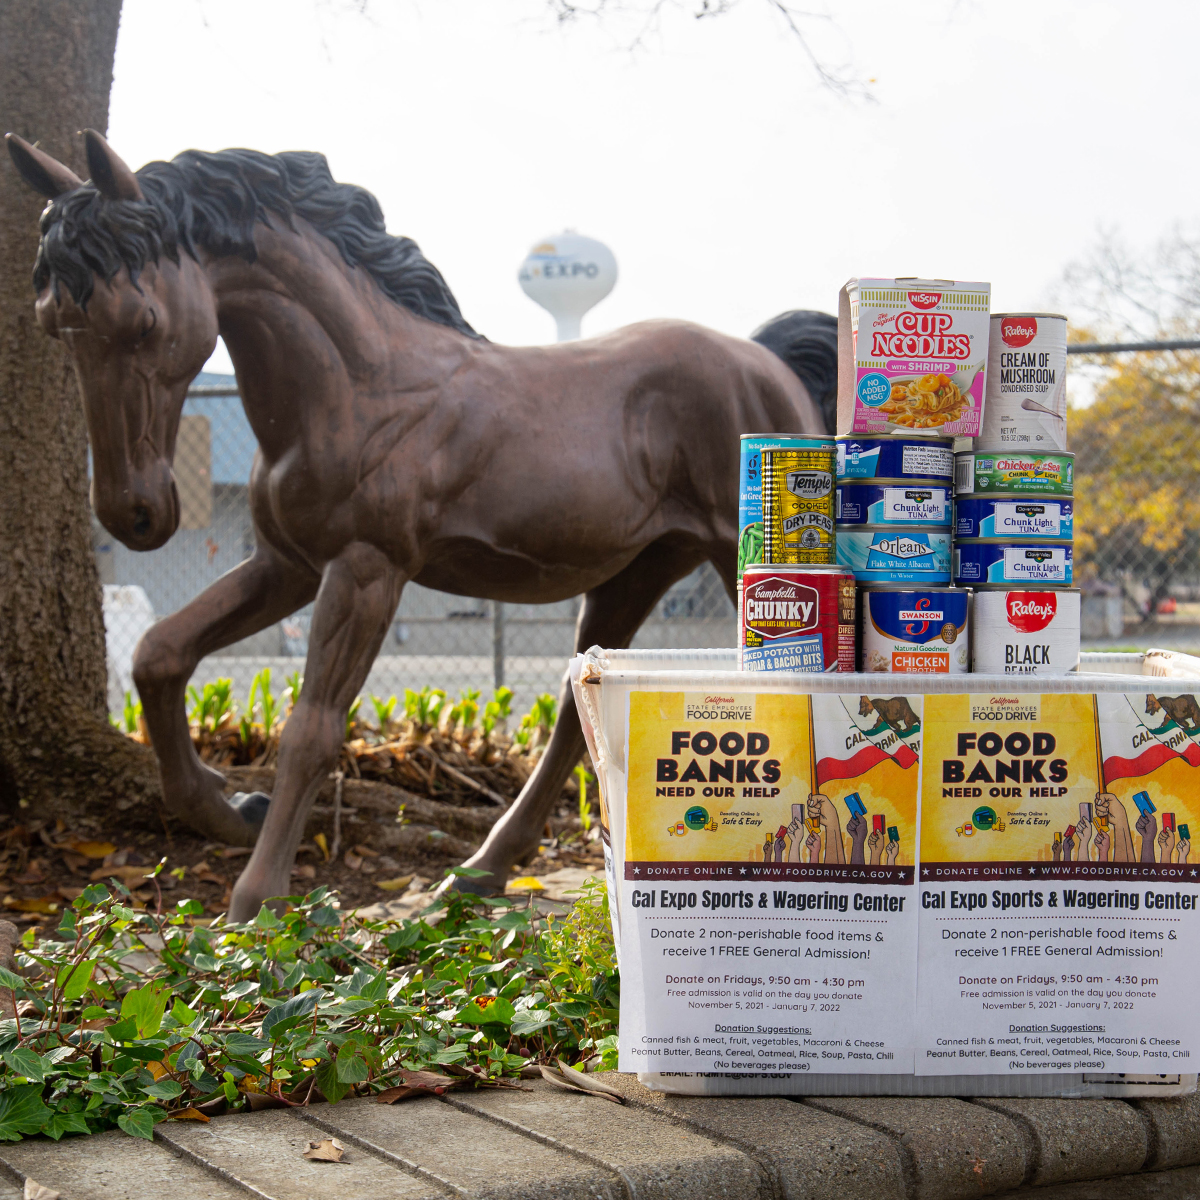 Donated canned foods sitting in a bin in front of a horse statue